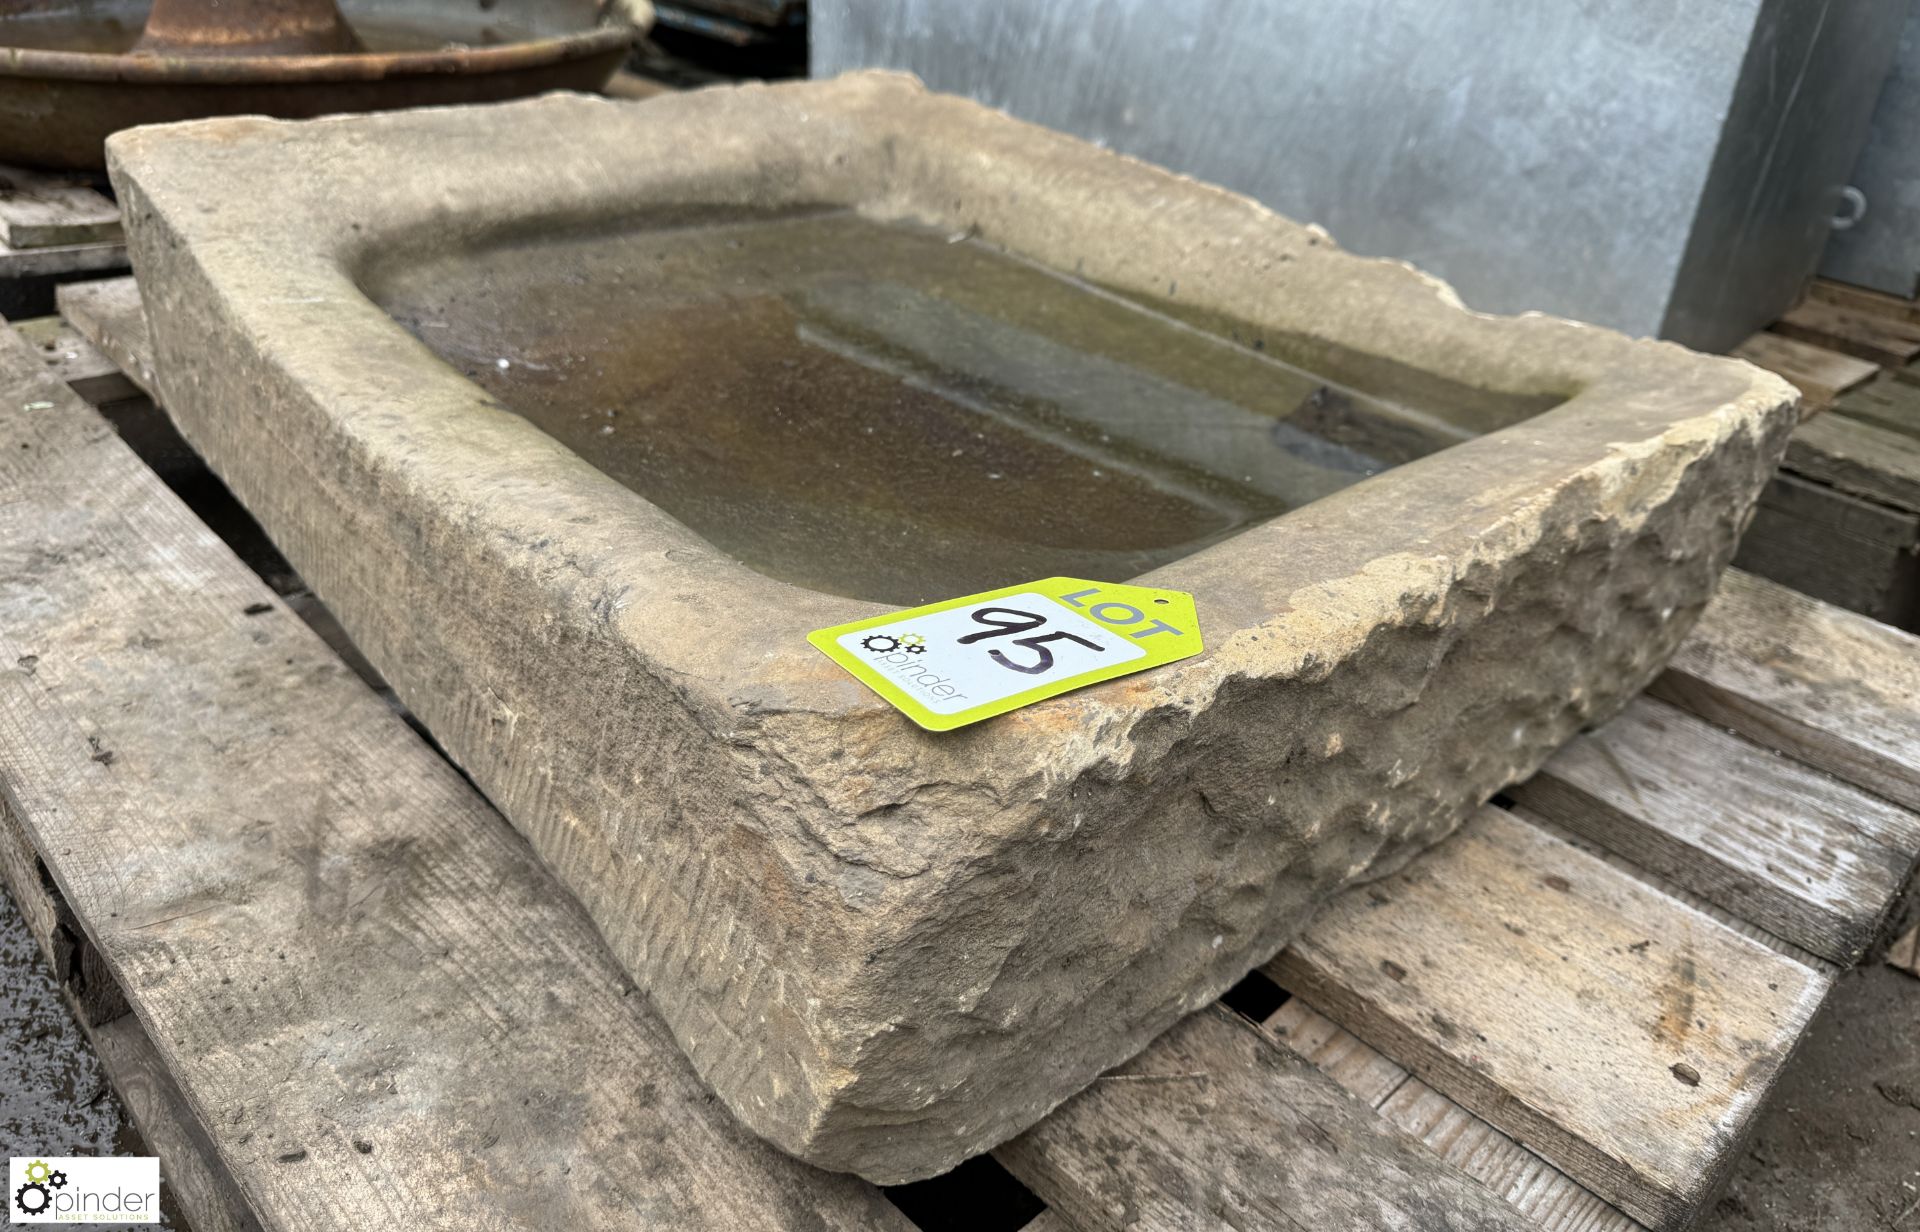 Yorkshire stone Sink, 700mm x 530mm x 140mm - Image 3 of 4